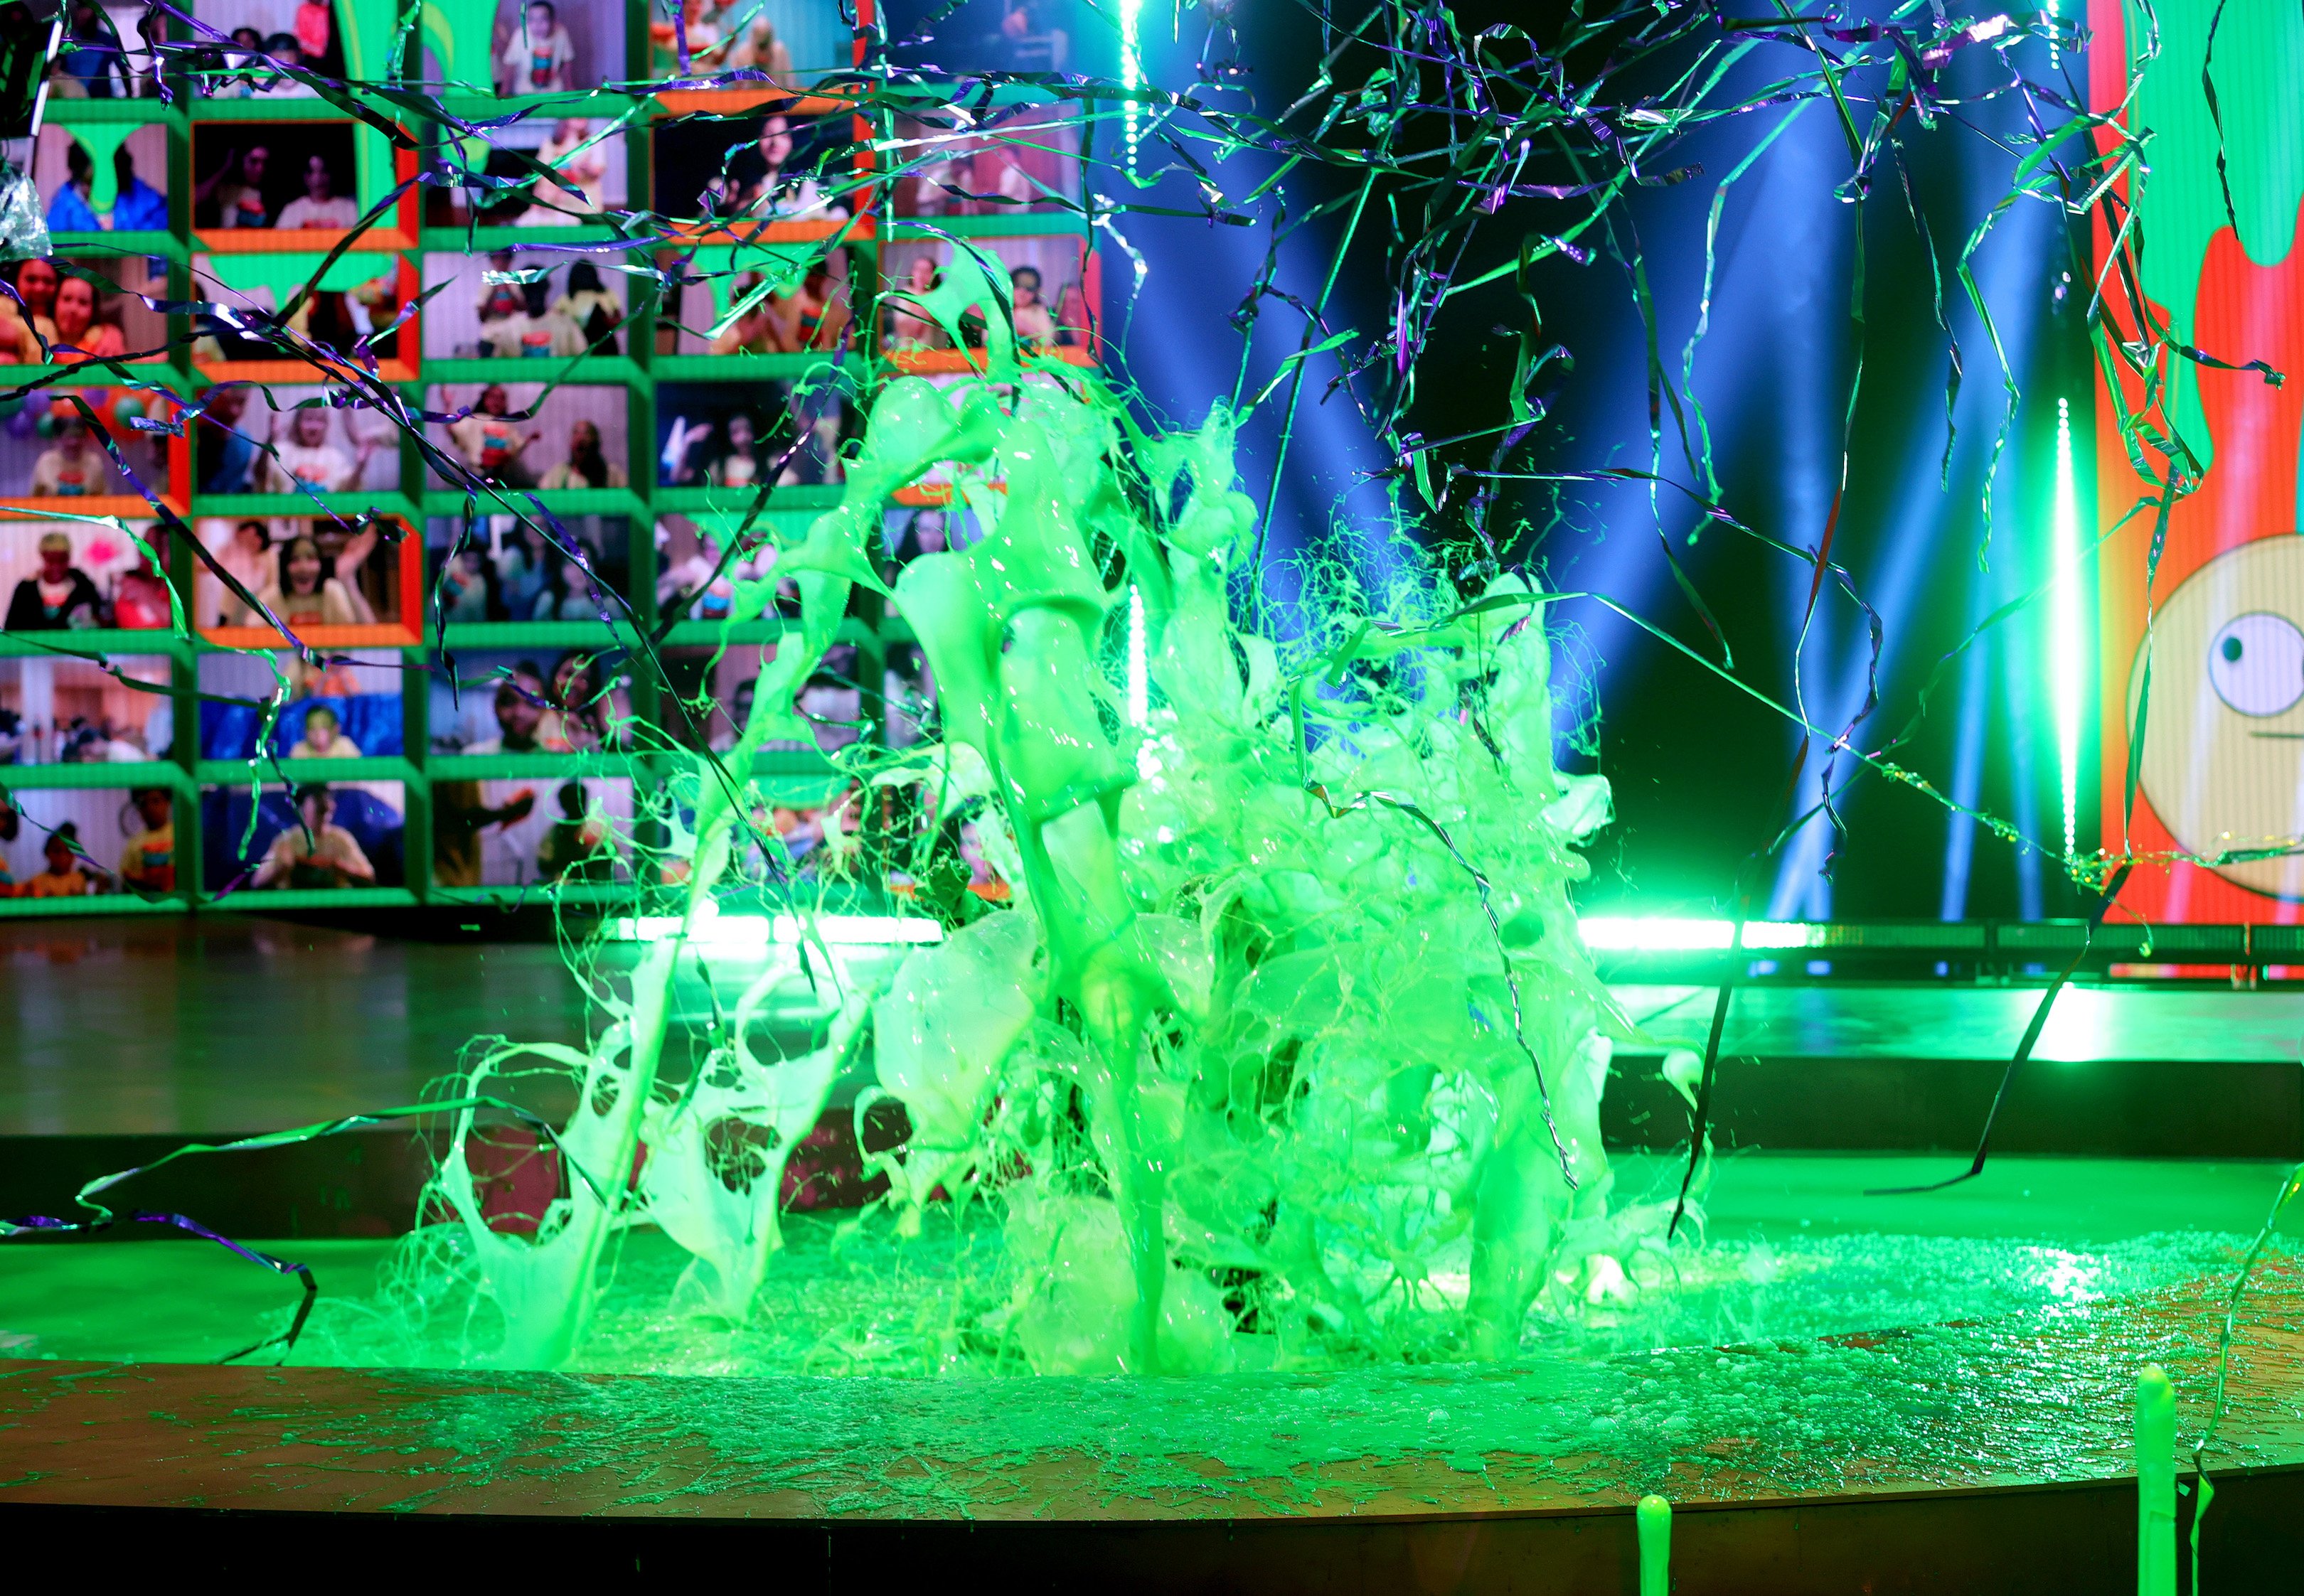 Host Kenan Thompson is slimed onstage during Nickelodeon's Kids' Choice Awards